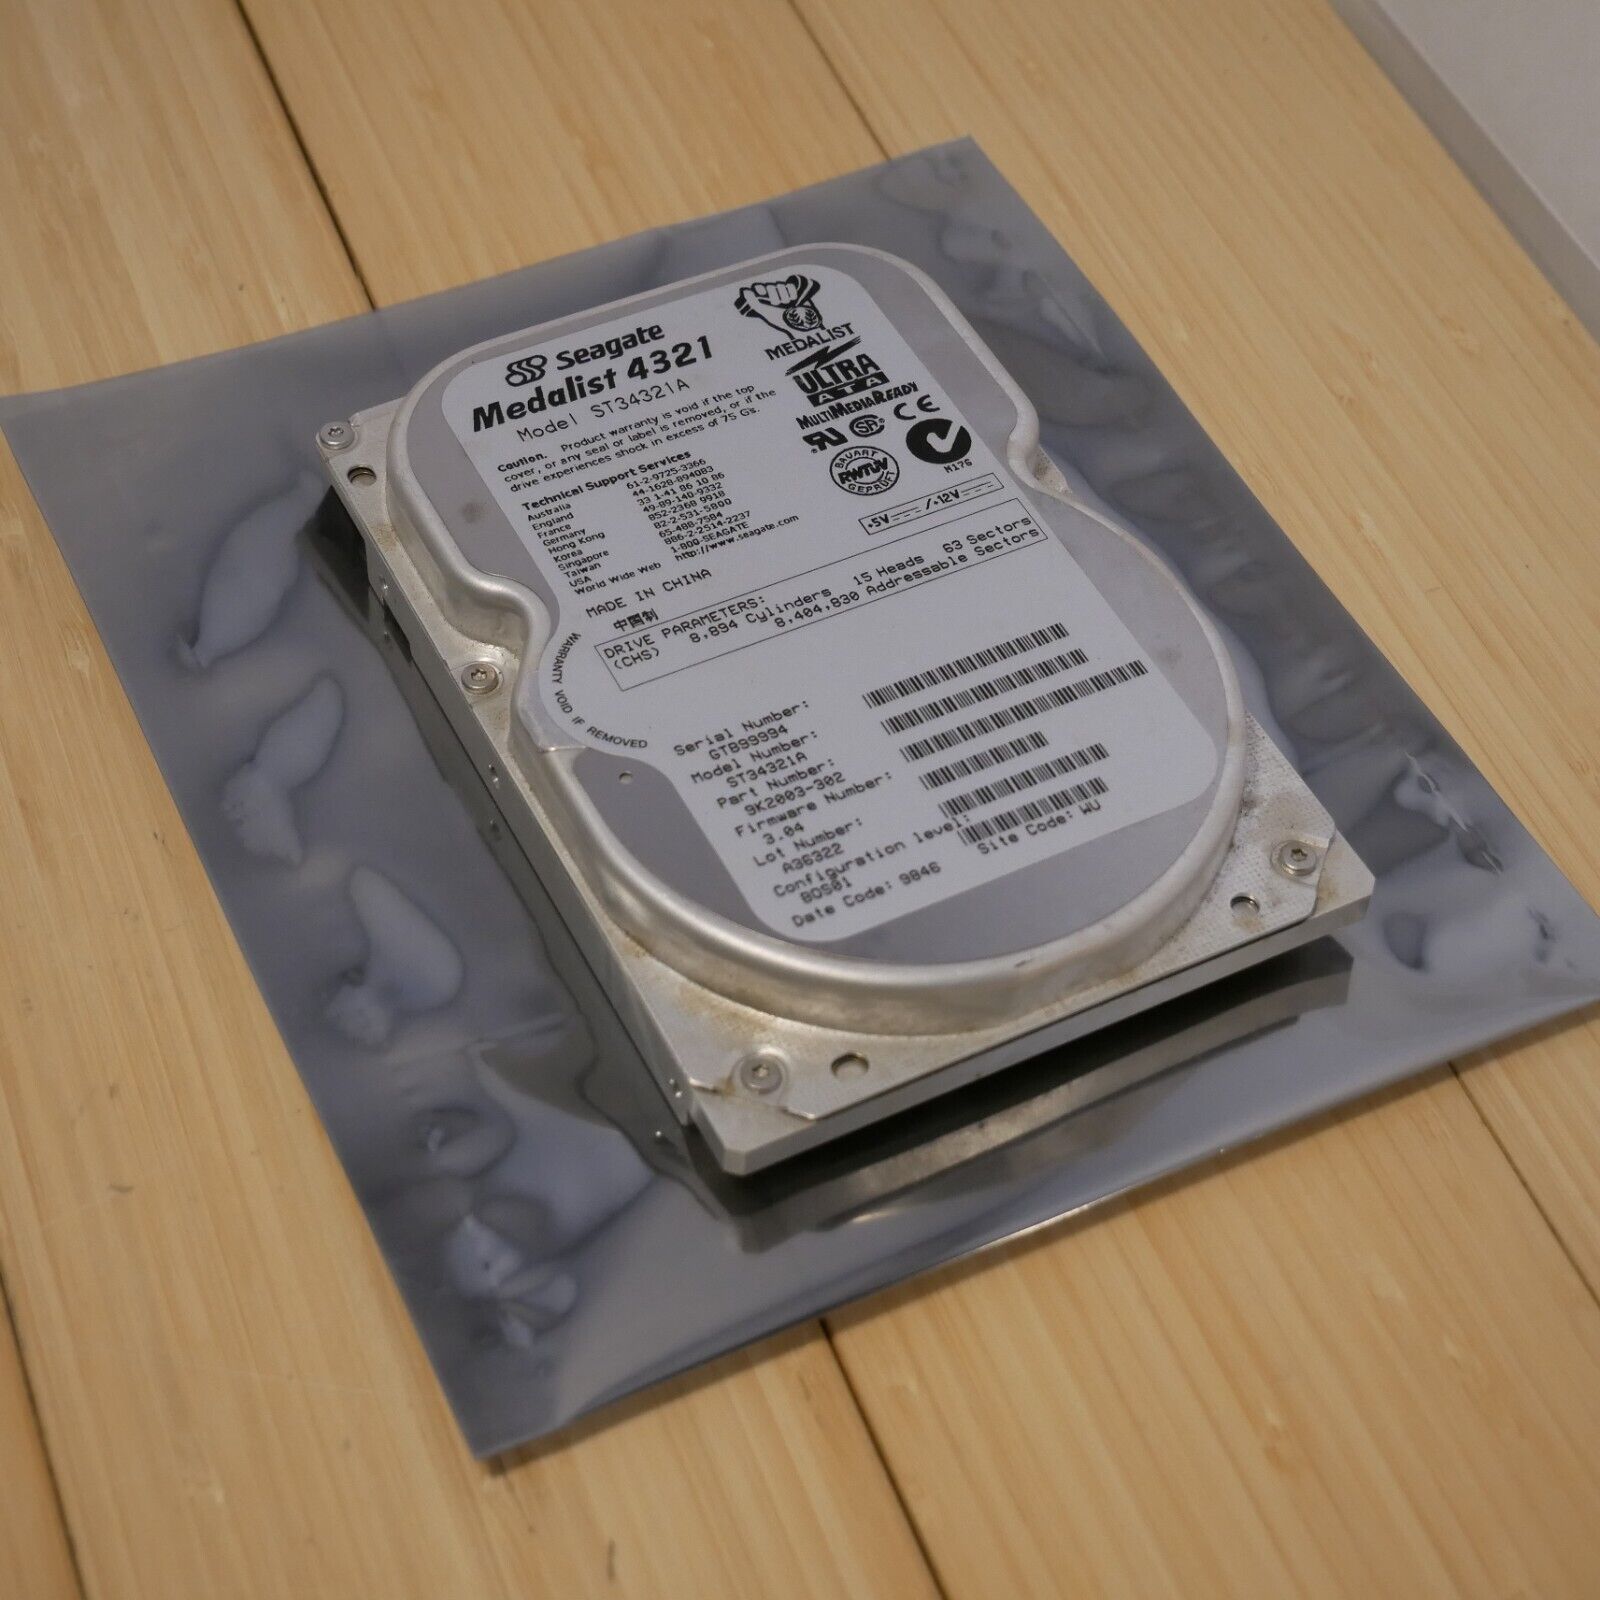 Seagate Medalist 4321 ST34321A 4.3GB 5400RPM 3.5in Hard Disk Drive - Tested 06 - $37.39